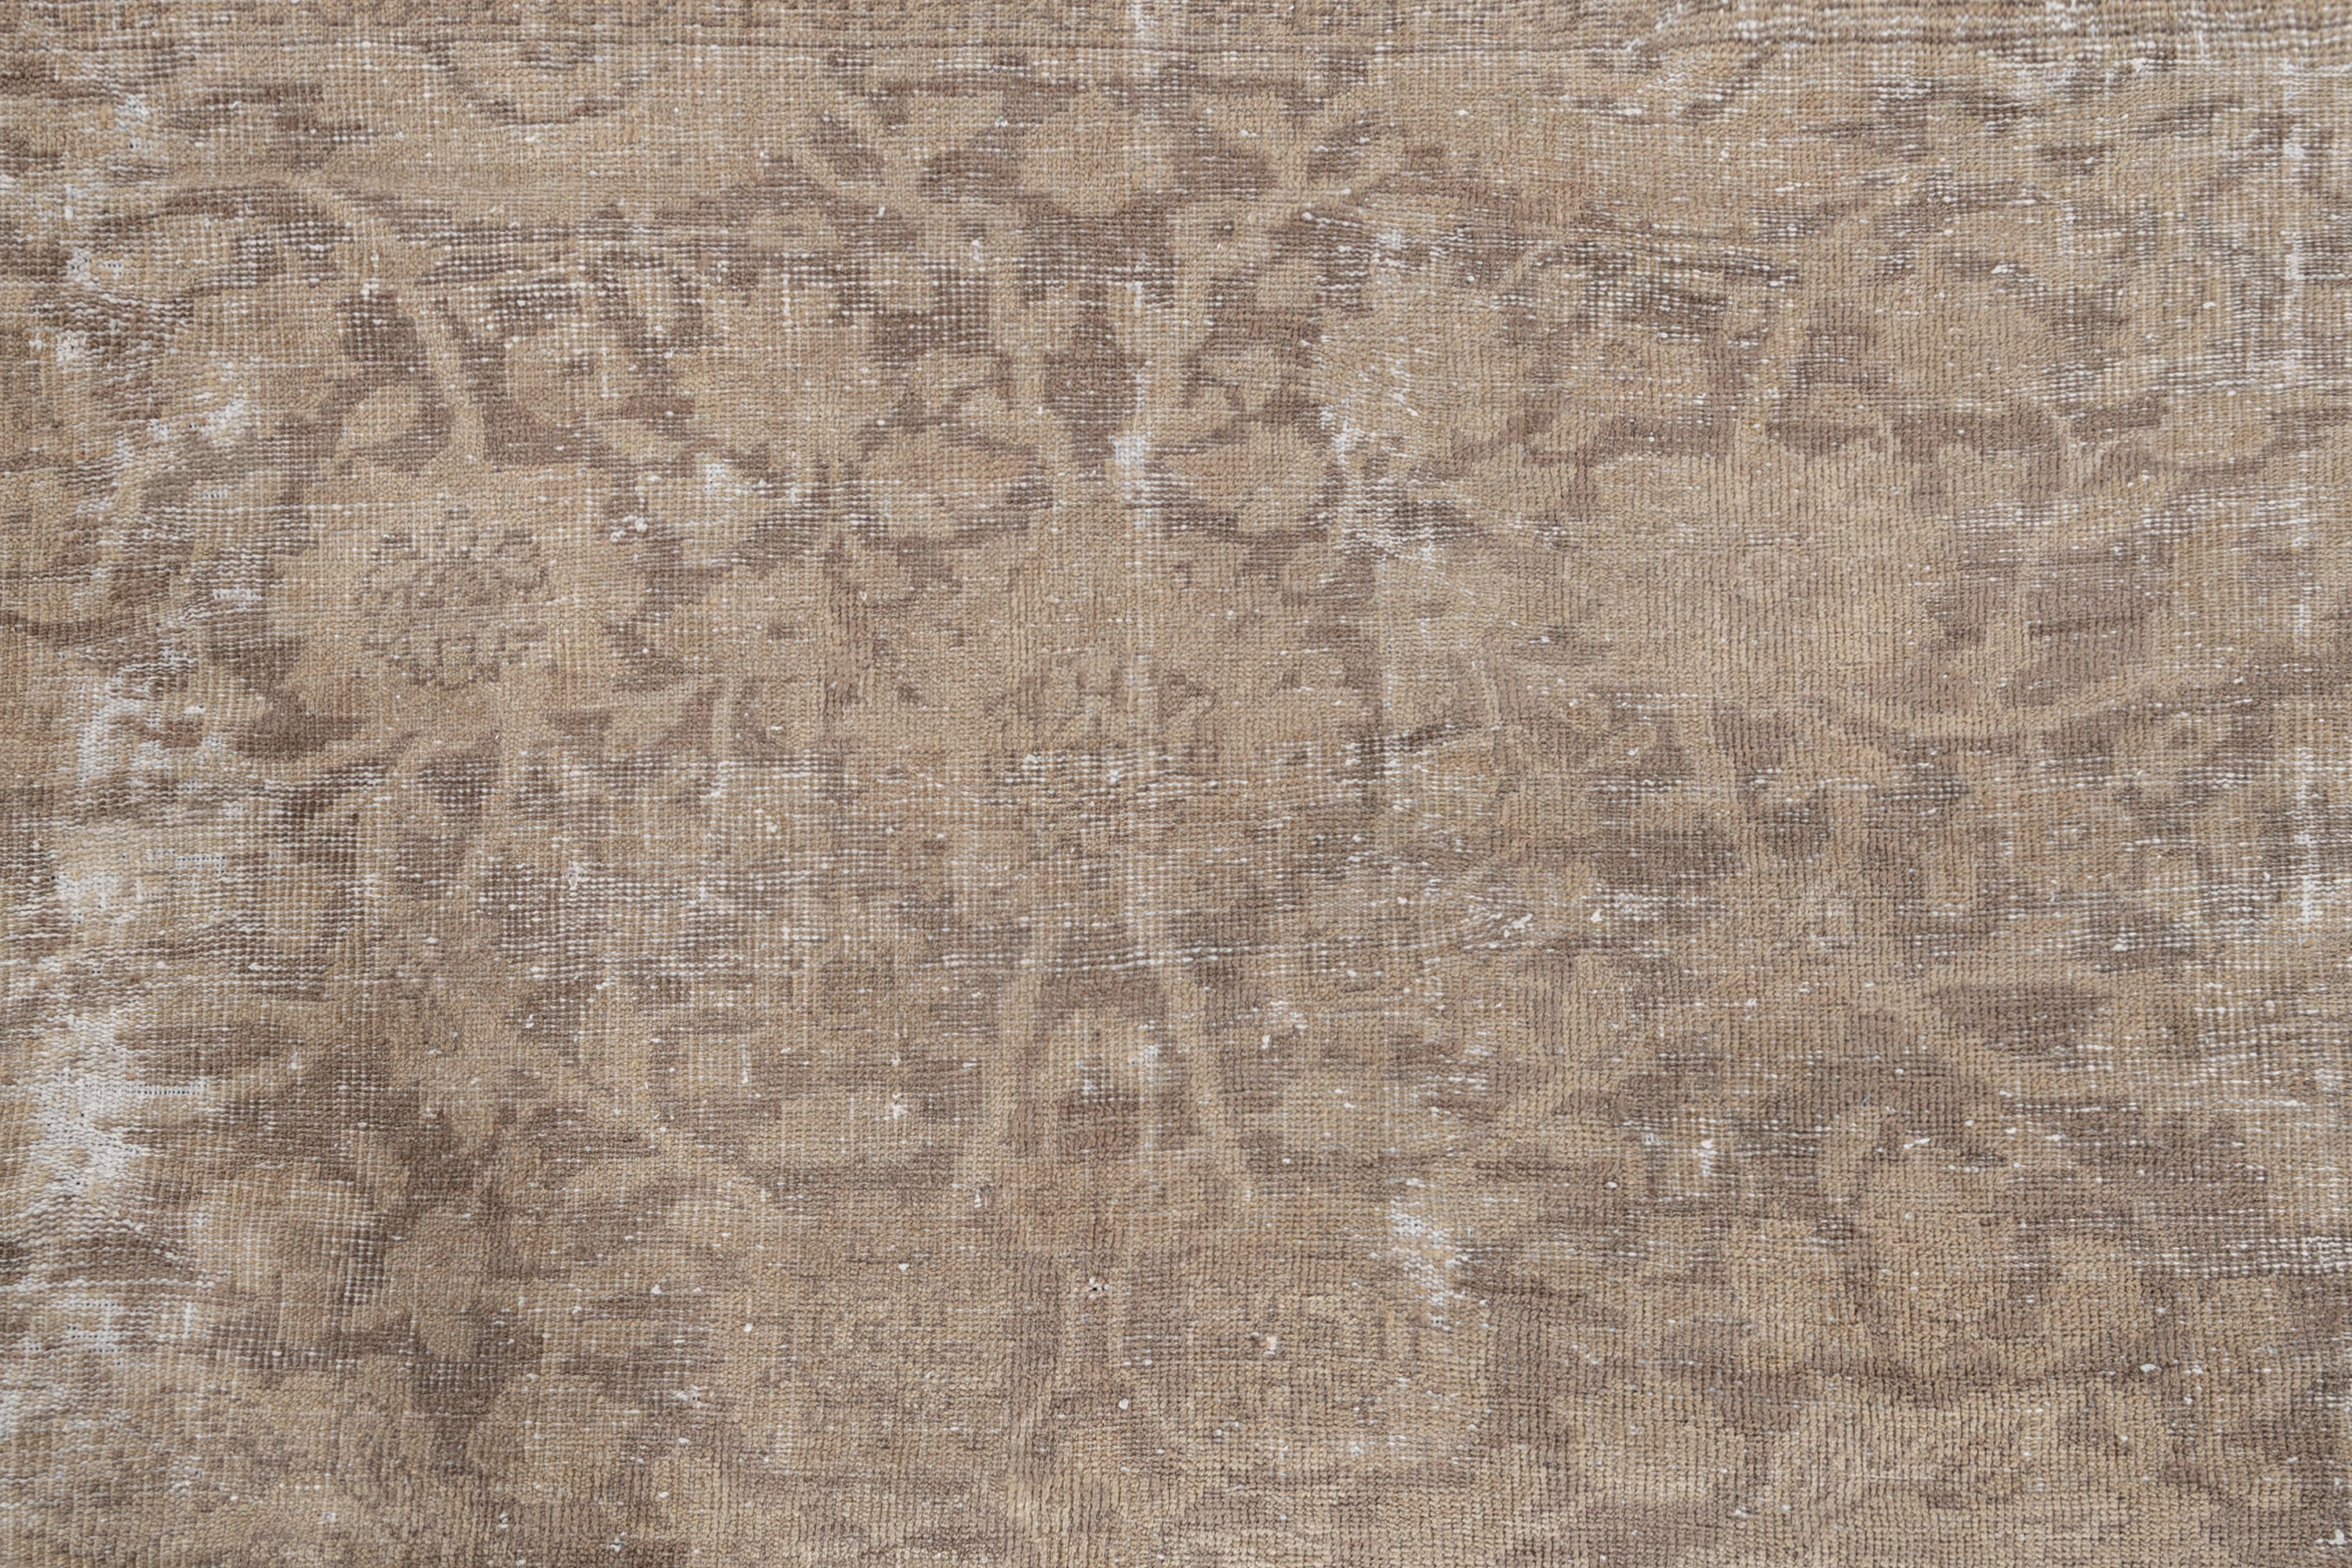 SULTANABAD RUG, WEST PERSIA, 15'10" X 24'6" - thumbnail 6